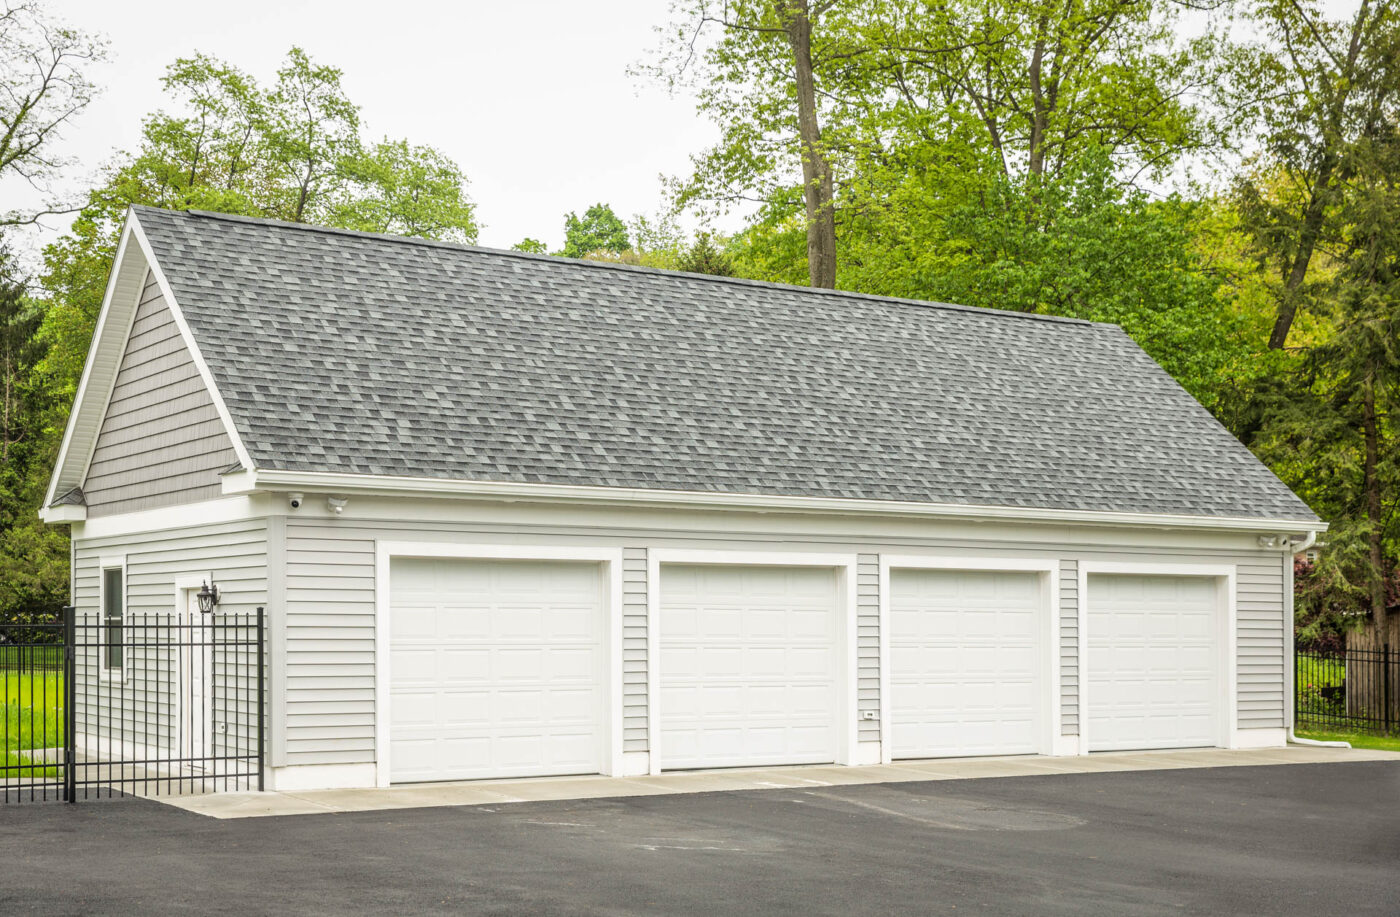 A 4-car garage with attic trusses.